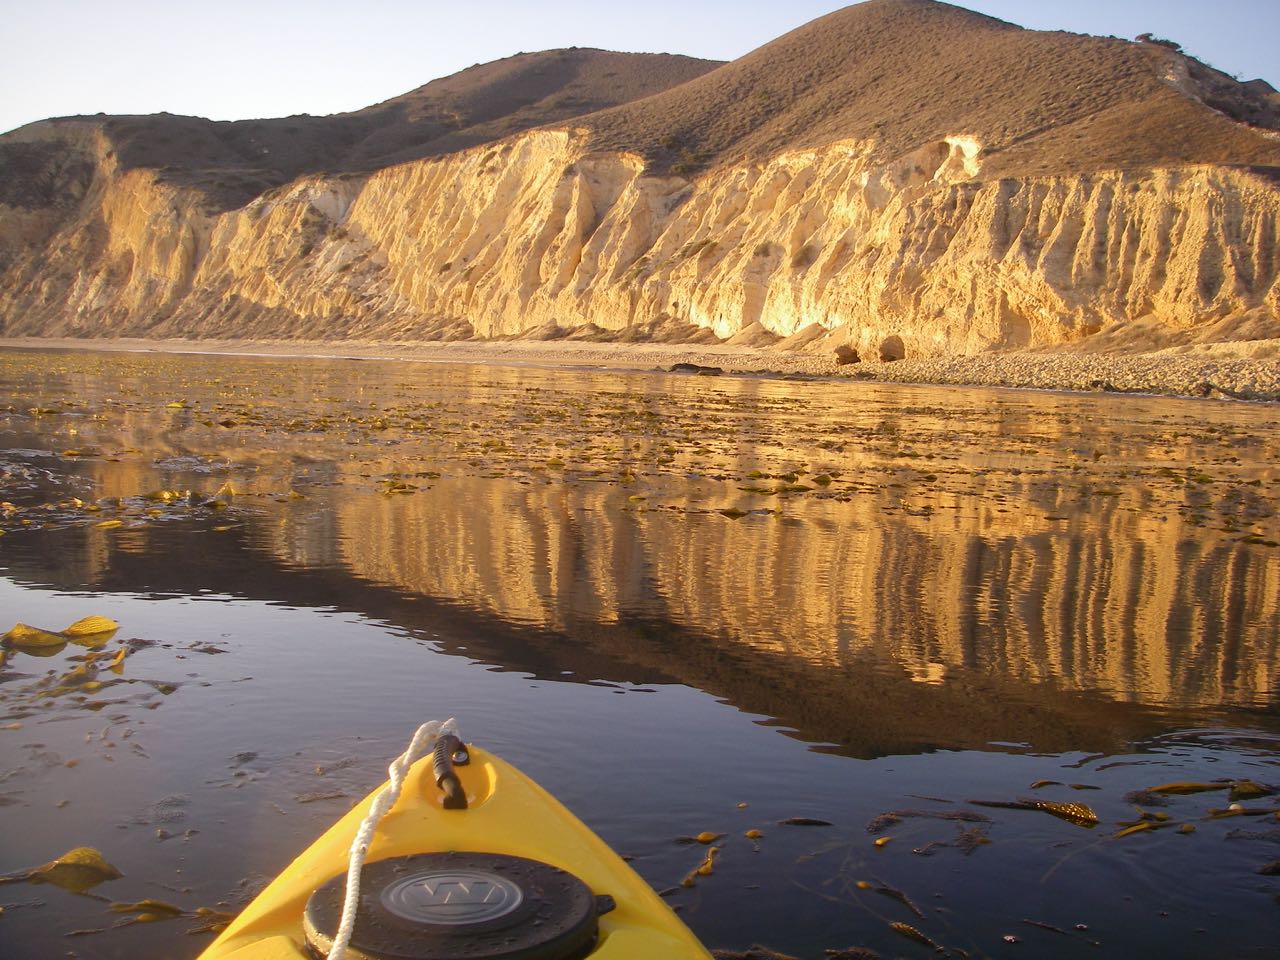 Sail to Shaws anchorage on Santa Cruz Island with Capt. Dan Ryder and Sail Channel Islands